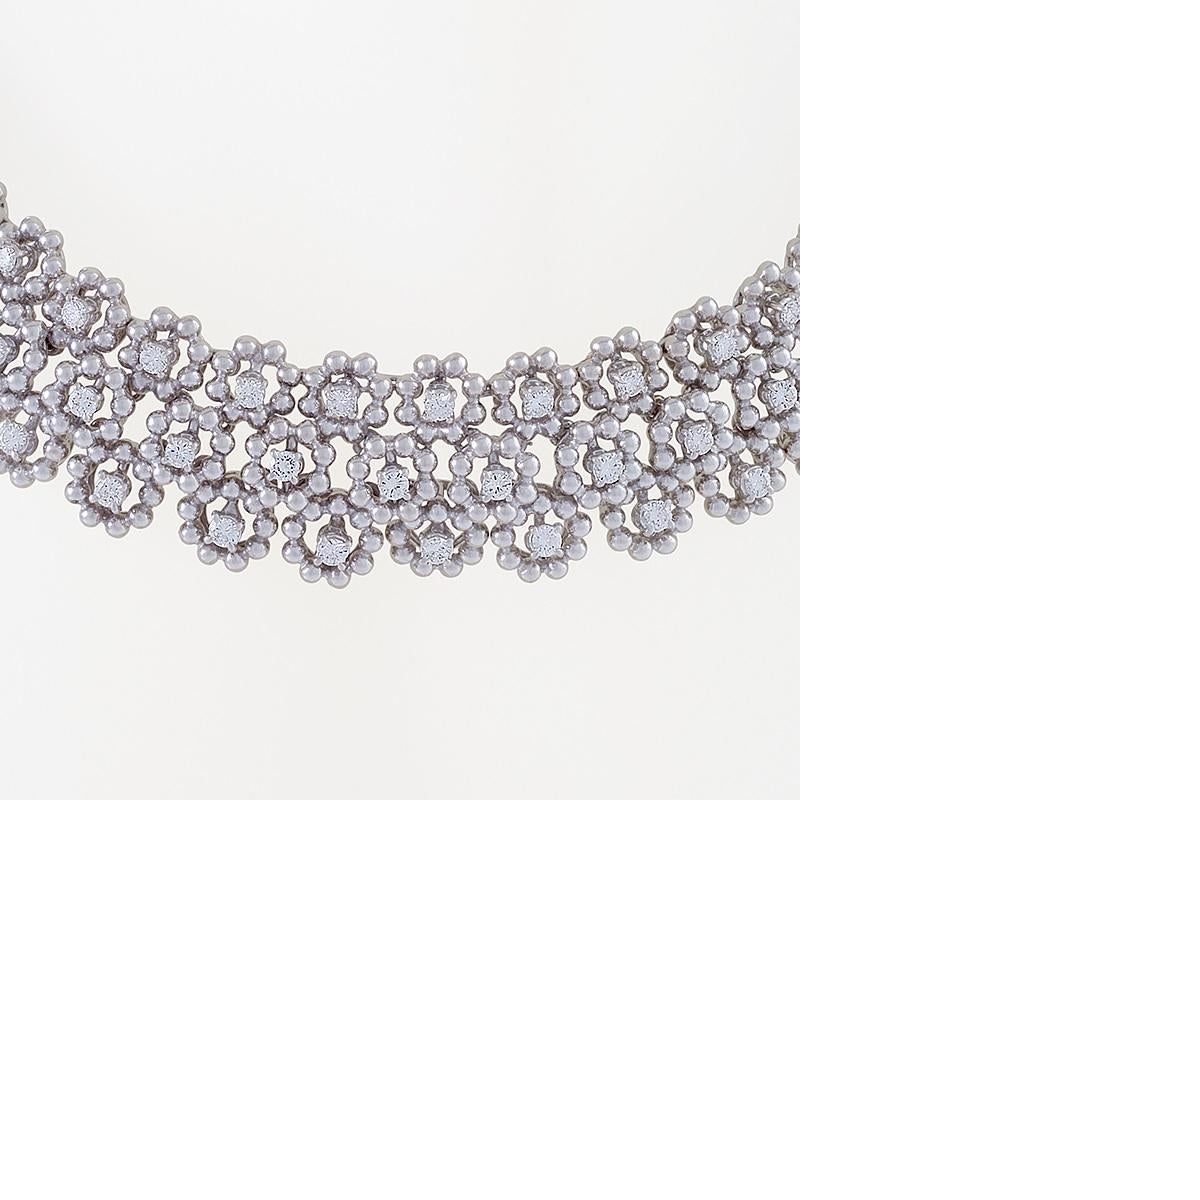 An Italian Mid-20th Century 18 karat white gold necklace with diamonds. The necklace has 138 round-cut diamonds with an approximate total weight of 11.04  carats, G/H color and VS clarity.  The necklace is designed as a series of three rows of